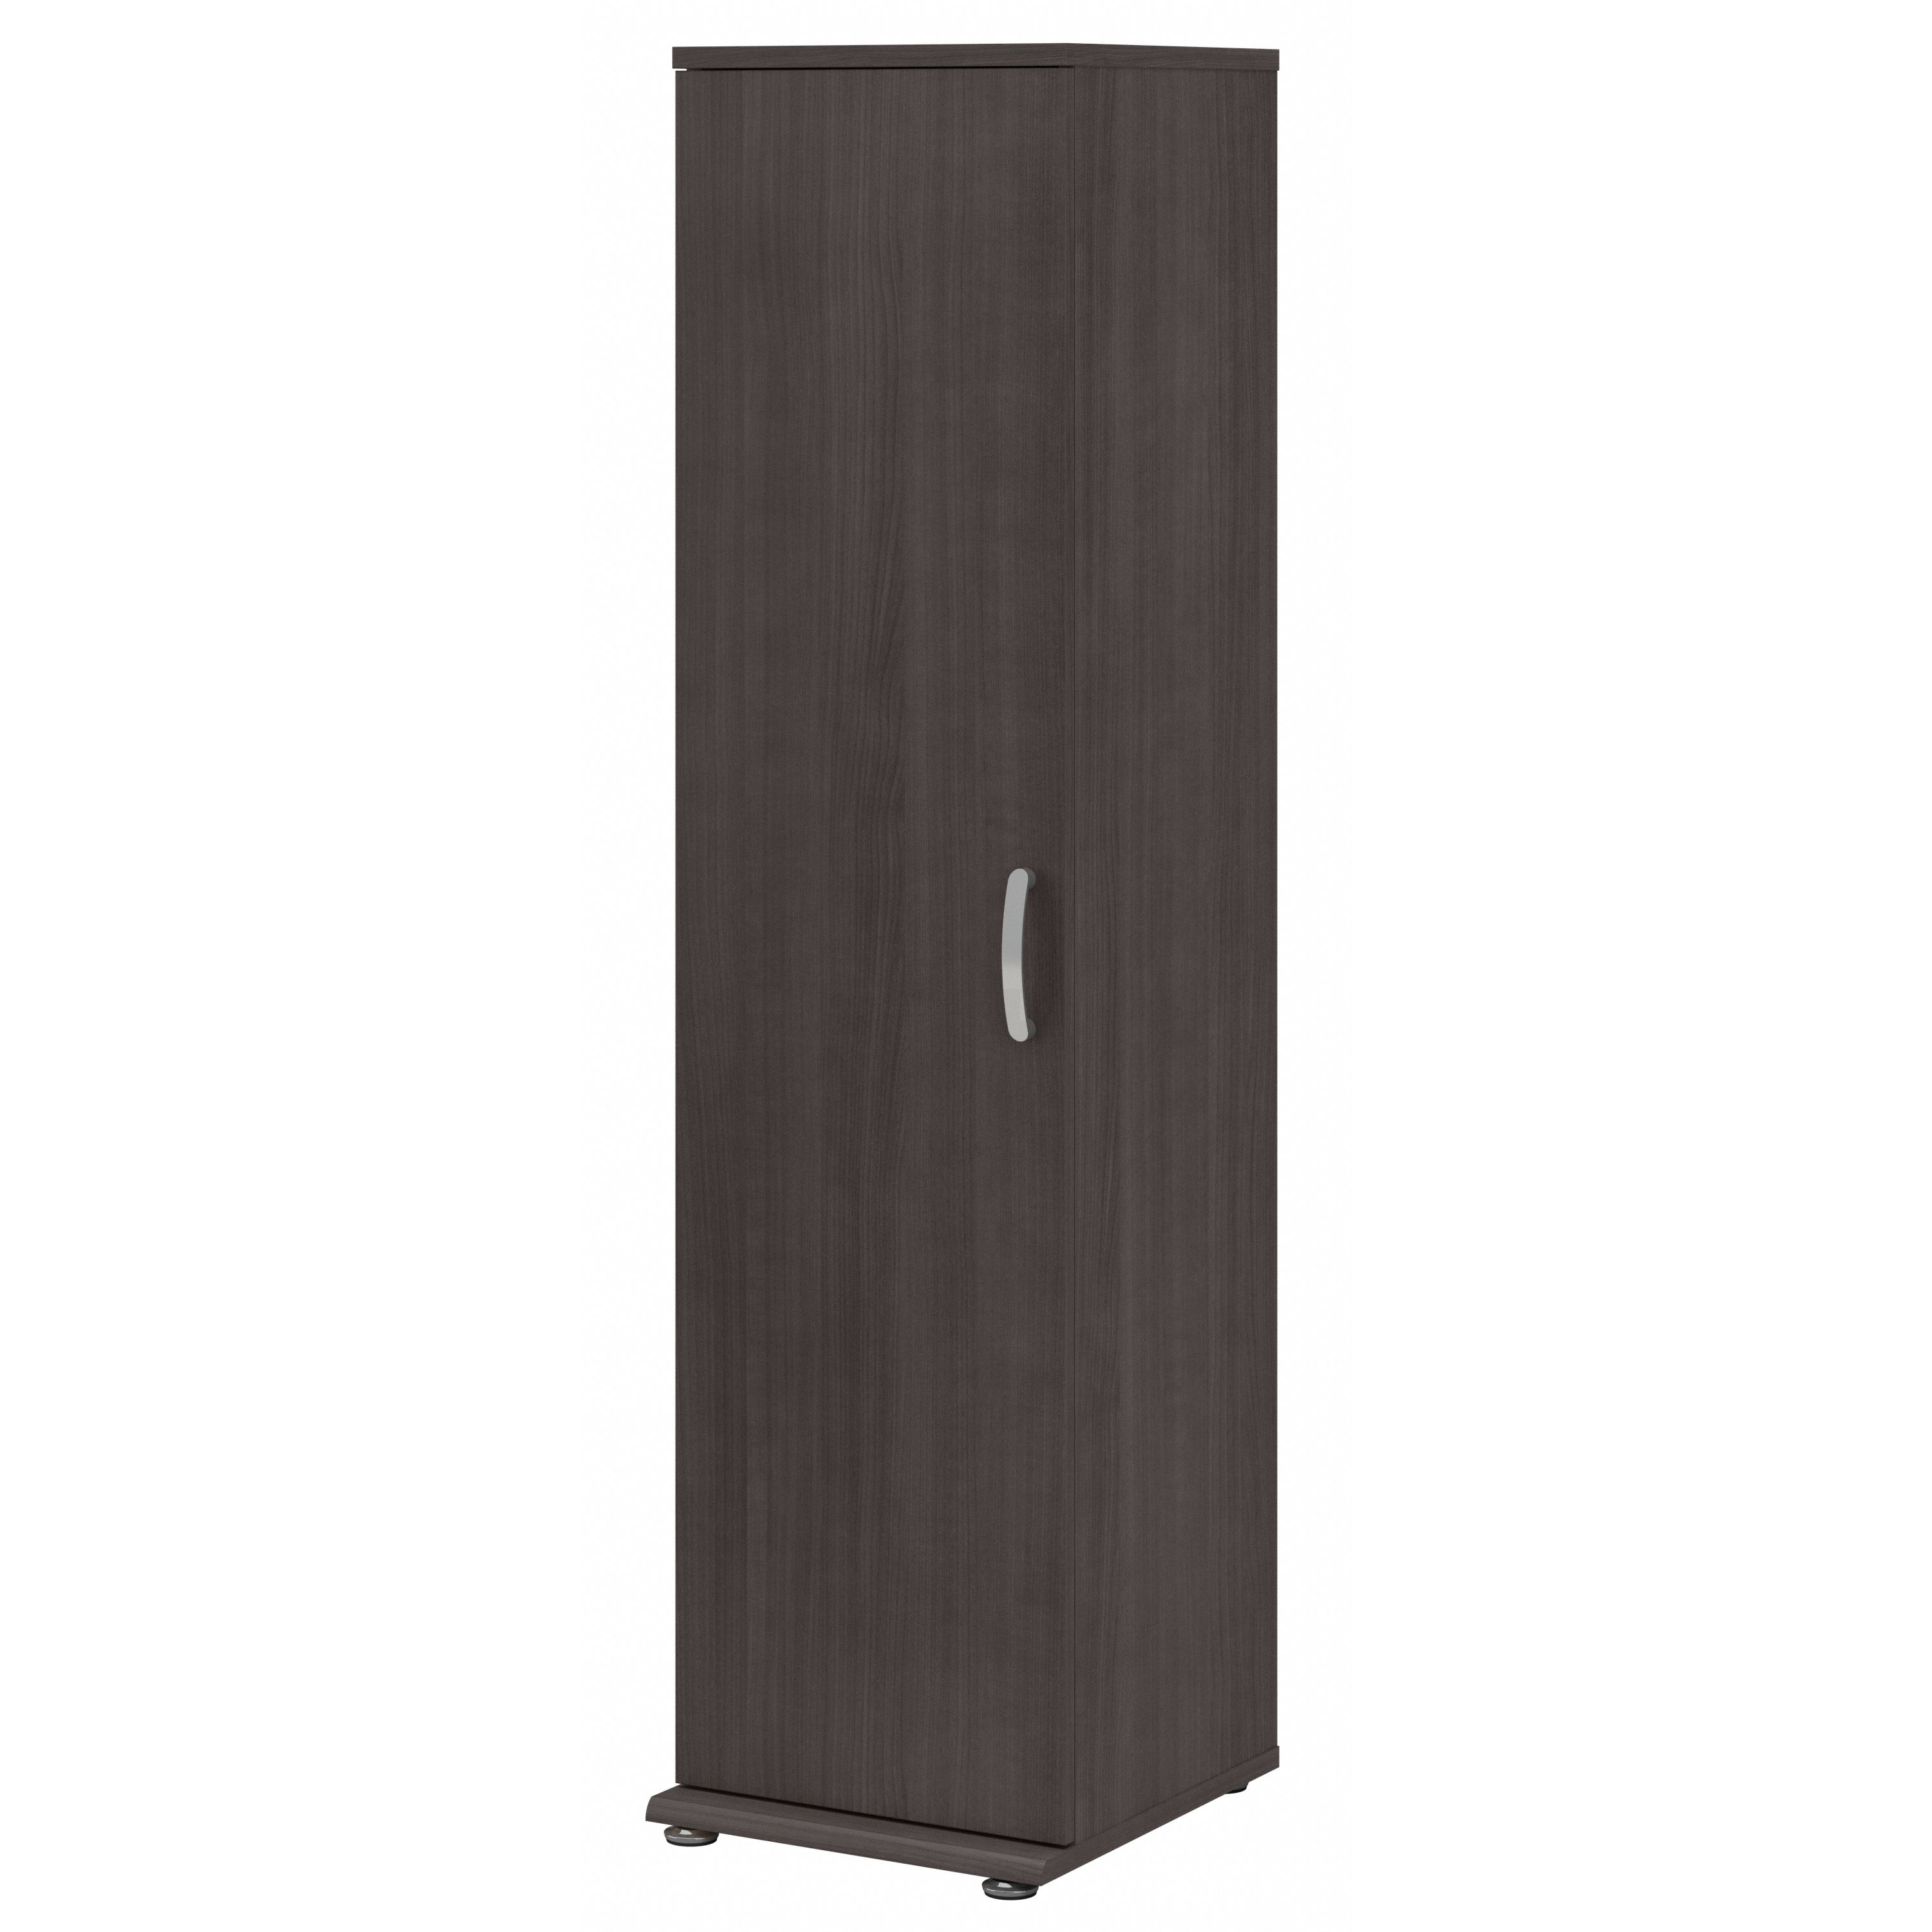 Shop Bush Business Furniture Universal Narrow Clothing Storage Cabinet with Door and Shelves 02 CLS116SG-Z #color_storm gray